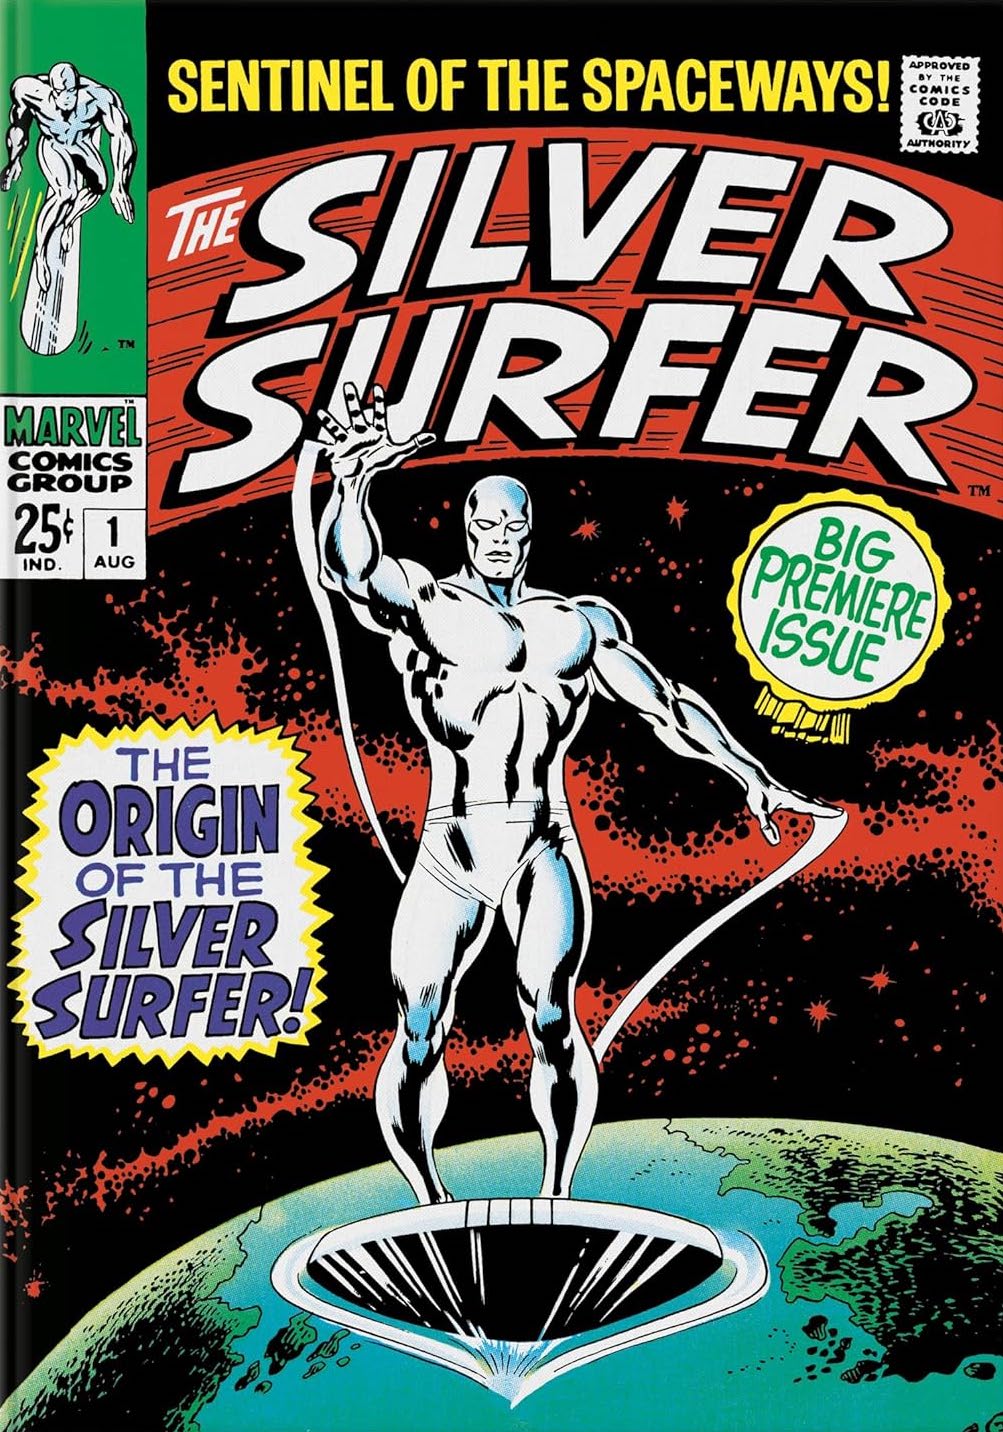 Marvel Comics Library. Silver Surfer. 1968–1970